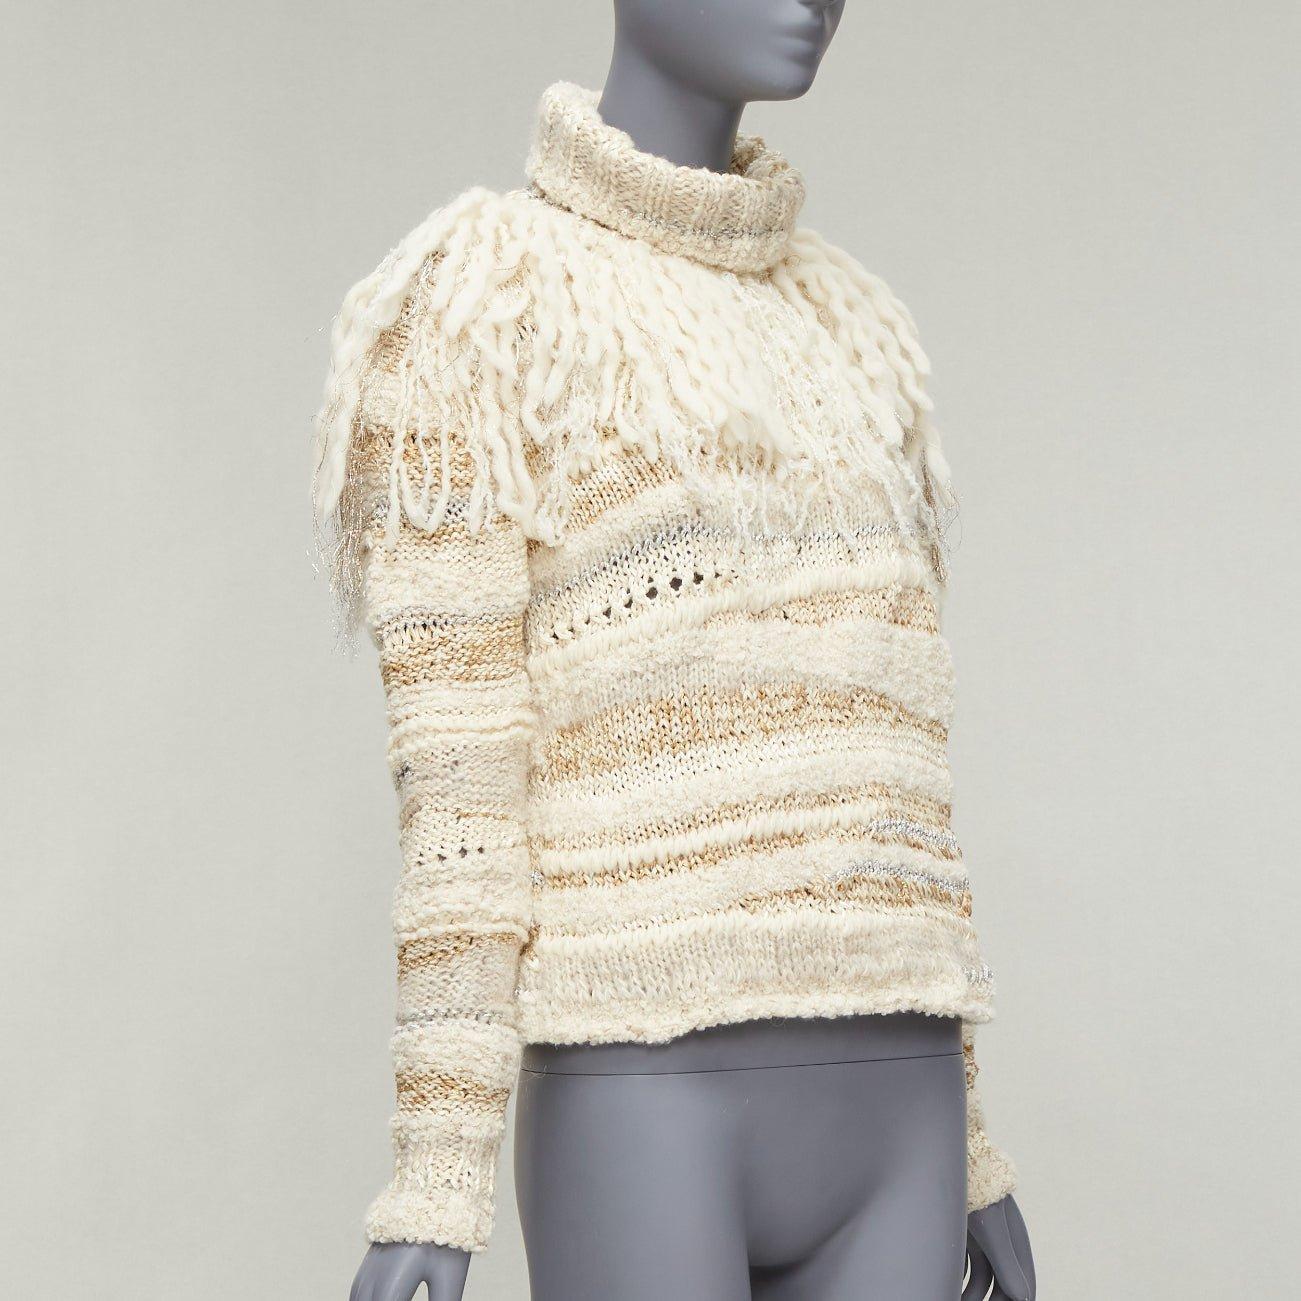 PRABAL GURUNG cream gold wool silk blend ethnic fringe crochet sweater XS
Reference: AAWC/A00654
Brand: Prabal Gurung
Material: Wool, Silk, Blend
Color: Cream, Gold
Pattern: Solid
Closure: Slip On
Extra Details: Fringe and gold metallic lurex